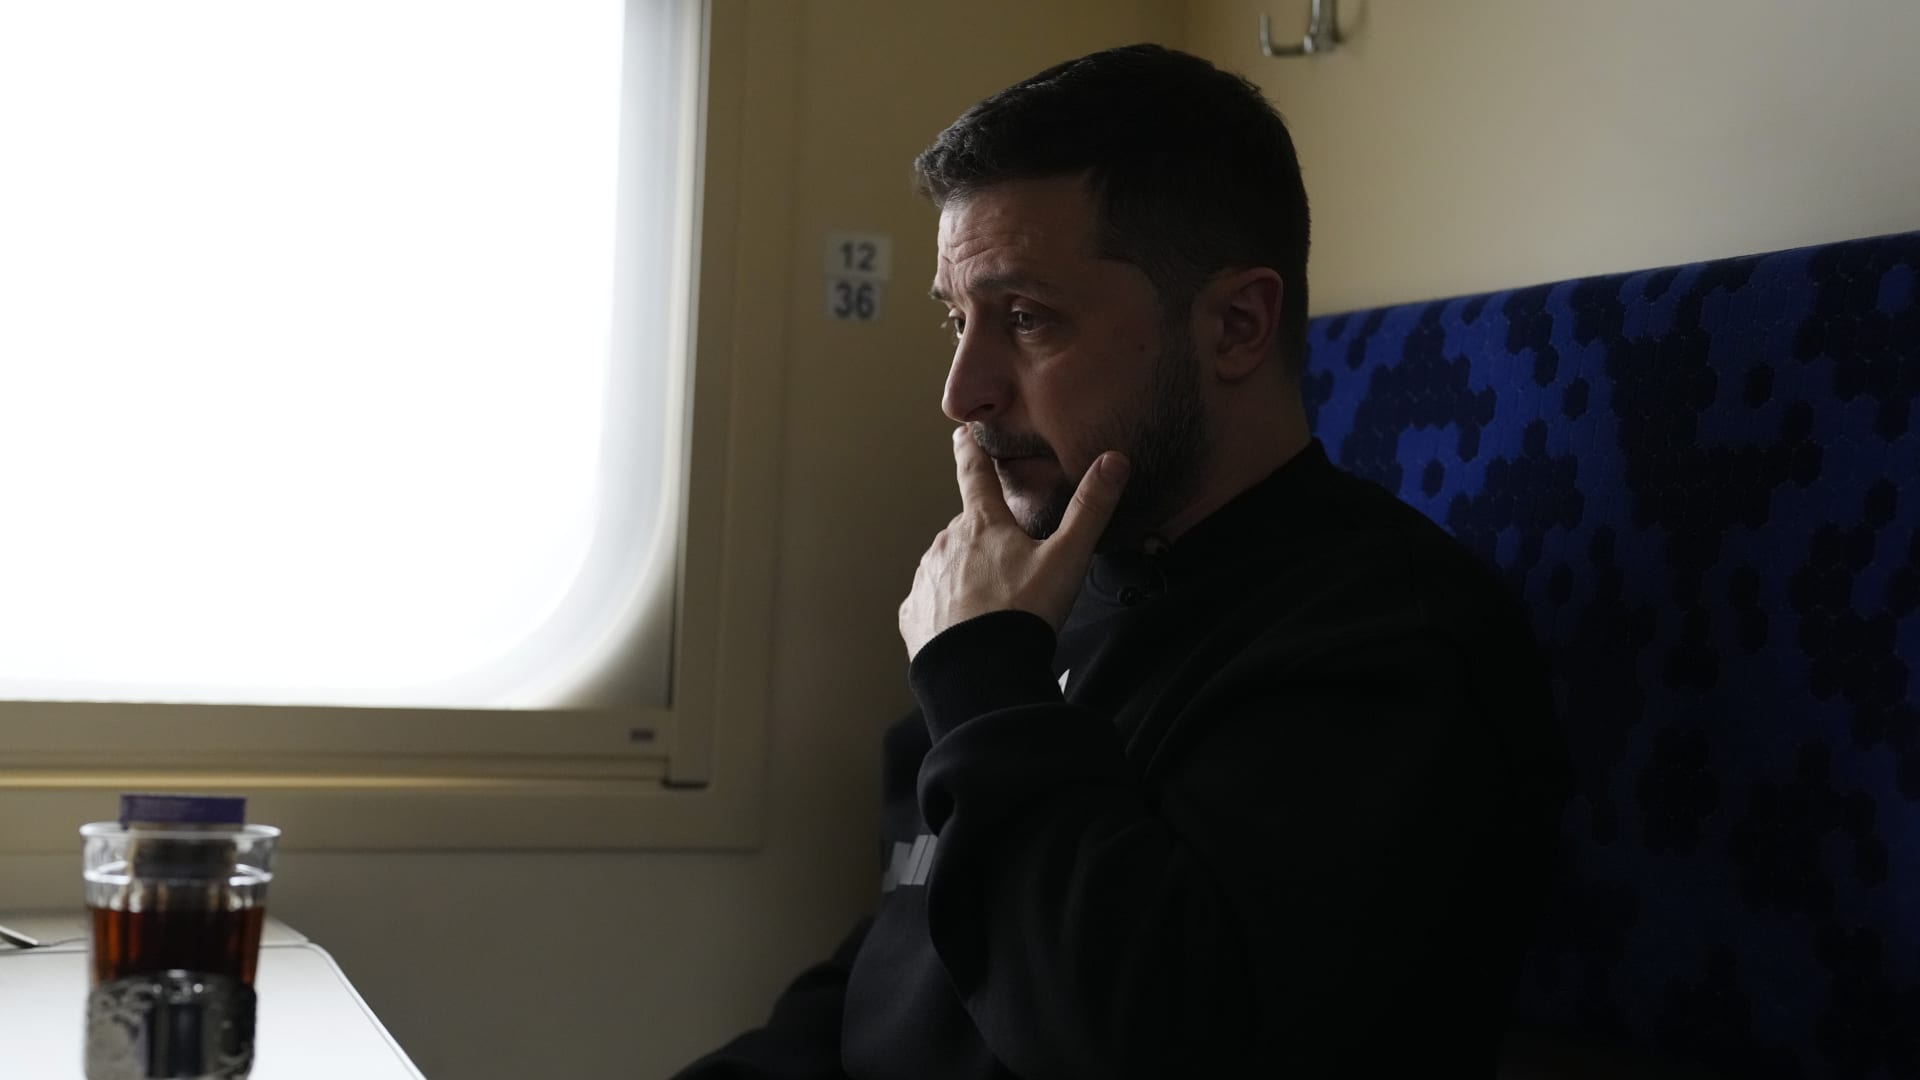 Ukrainian President Volodymyr Zelenskyy pauses during an interview with Julie Pace, senior vice president and executive editor of The Associated Press, on a train traveling from the Sumy region to Kyiv, Ukraine, Tuesday March 28, 2023.